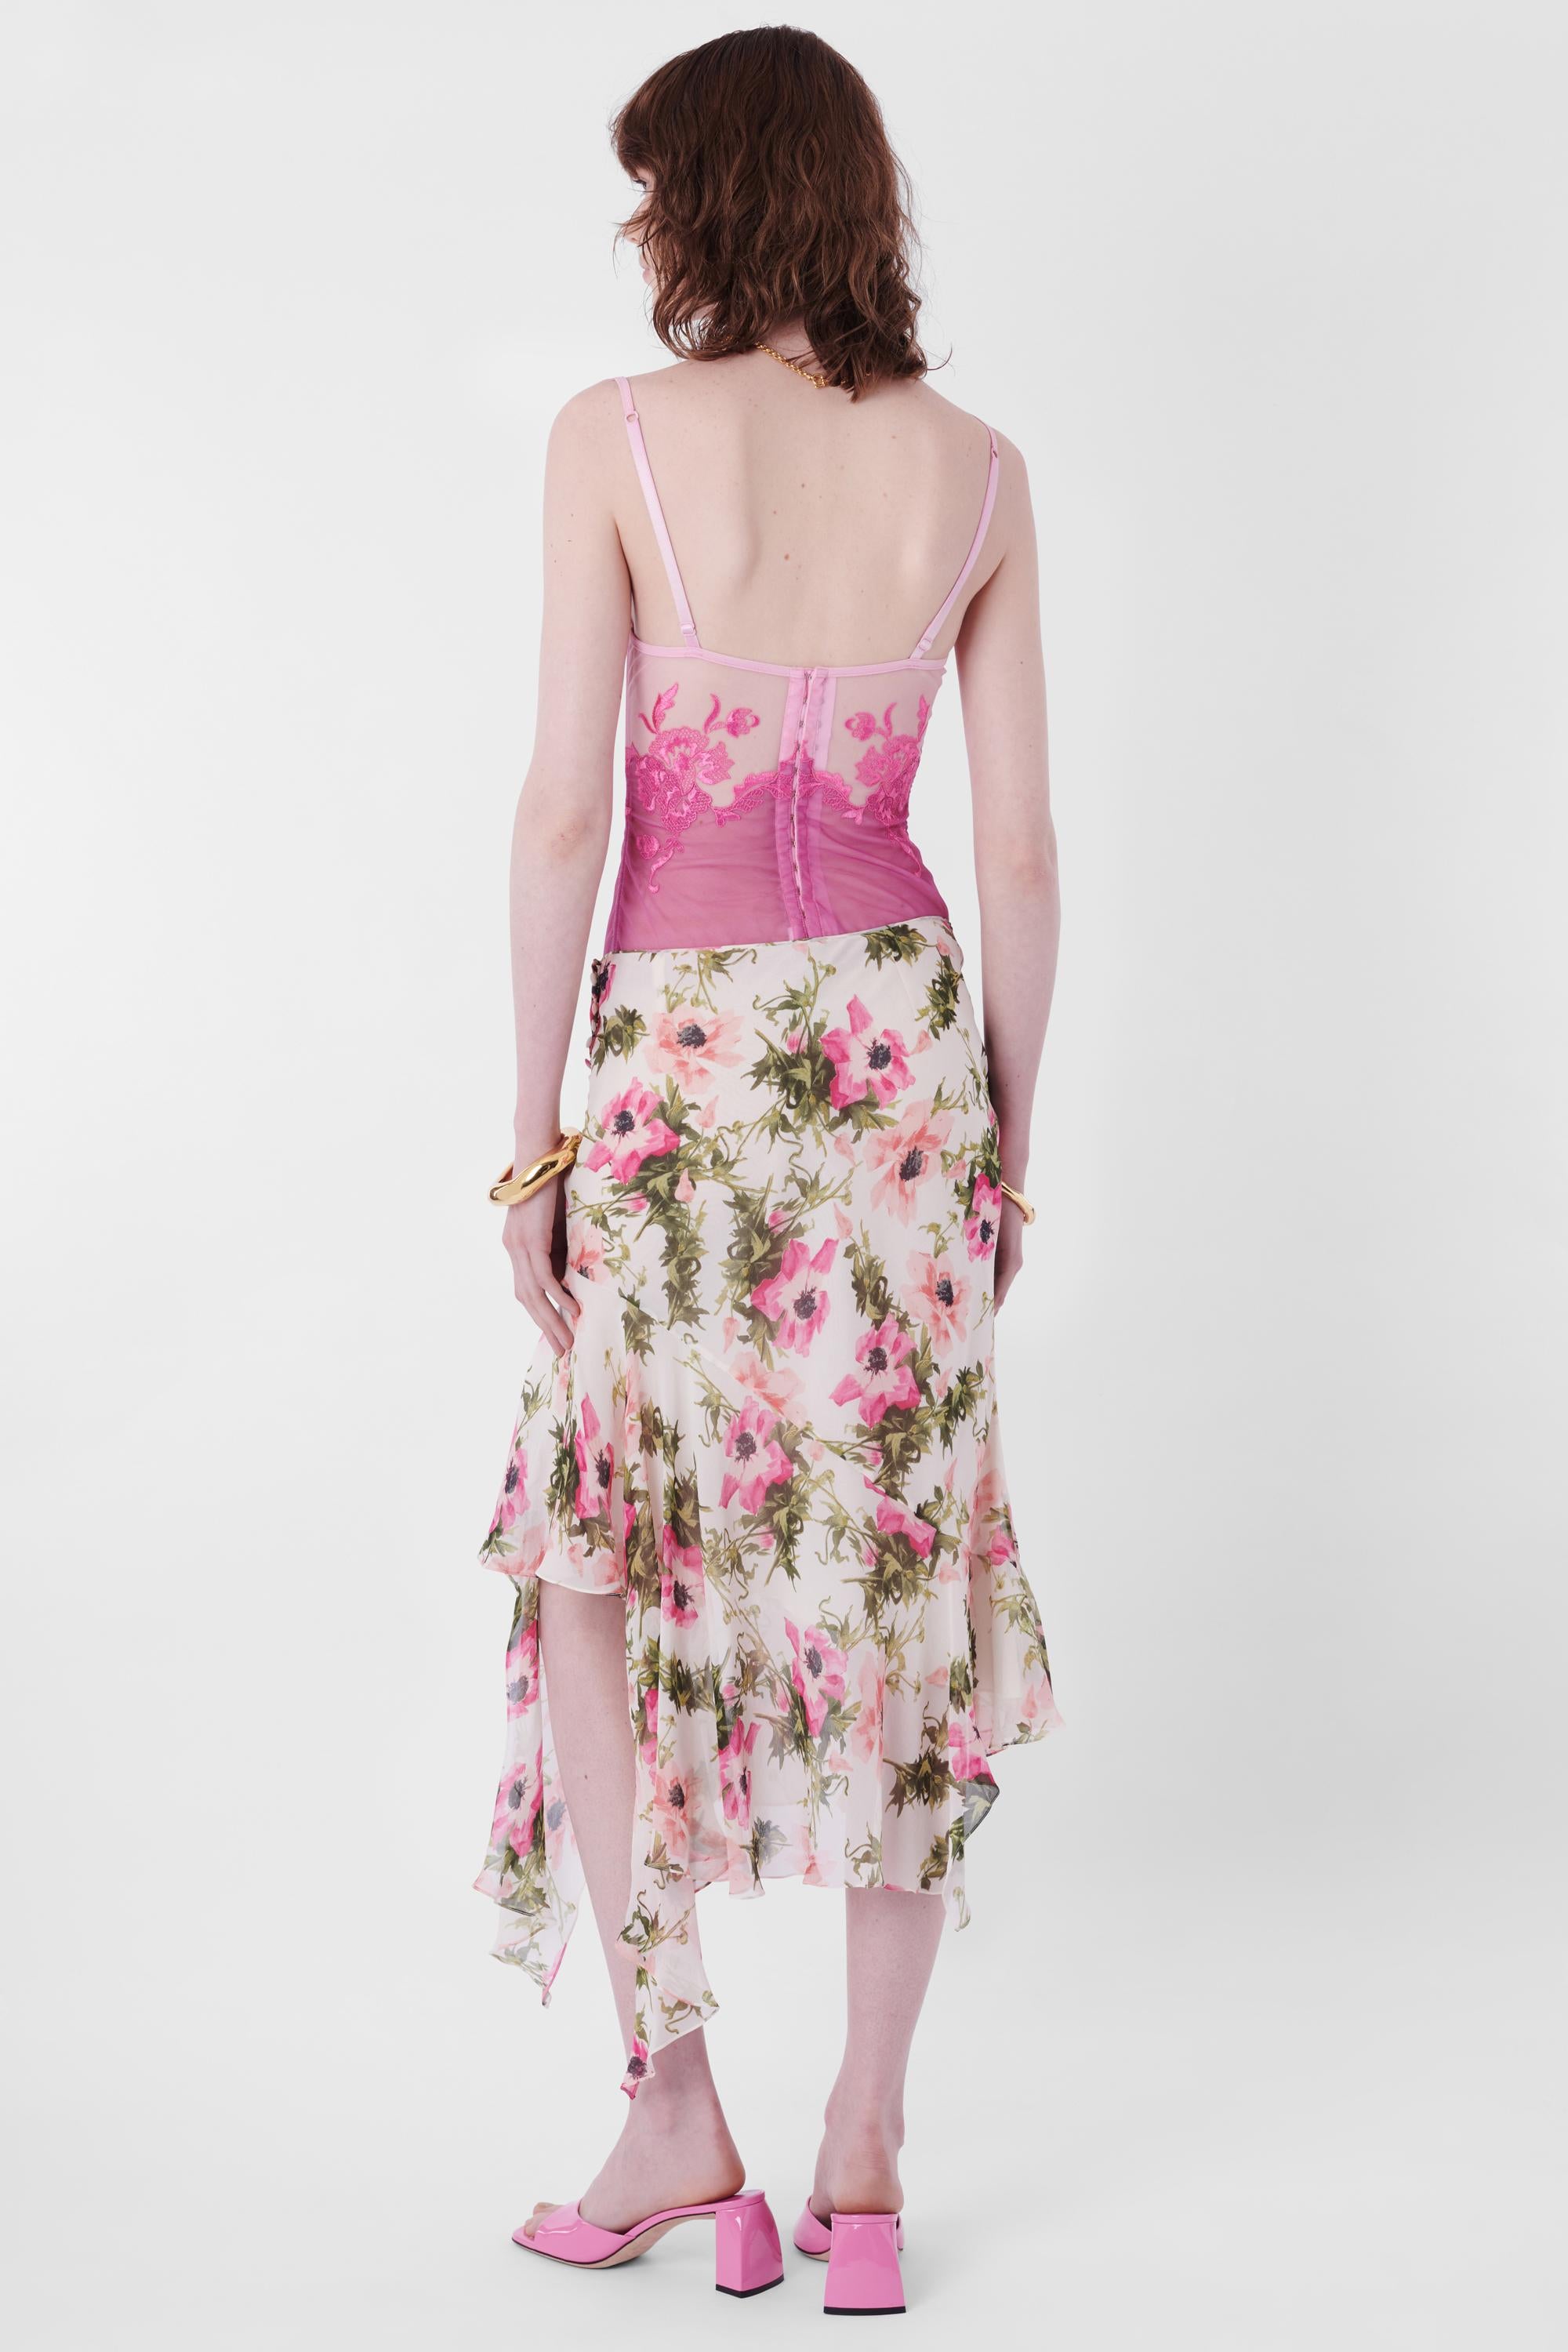 S/S 2005 Floral Silk Skirt In Excellent Condition For Sale In London, GB